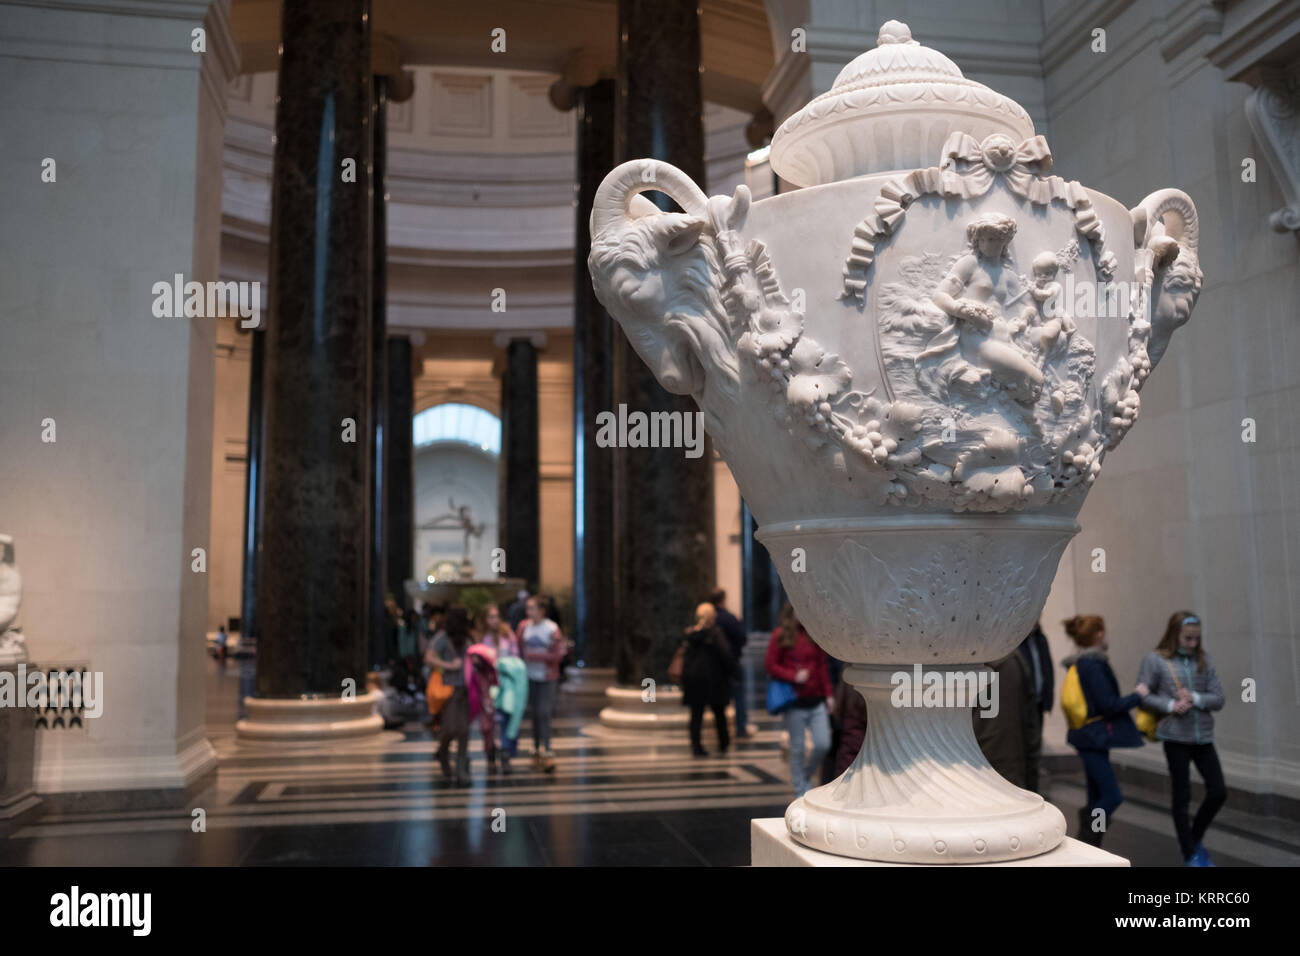 WASHINGTON DC, United States — A decorative urn on display in the main hall of the National Gallery of Art in Washington DC. The National Gallery of Art is renowned for its collection of European and American art, offering a comprehensive timeline of artistic development from the Middle Ages to the present day. Its esteemed status as a free public museum underscores its national significance and commitment to art education. Stock Photo